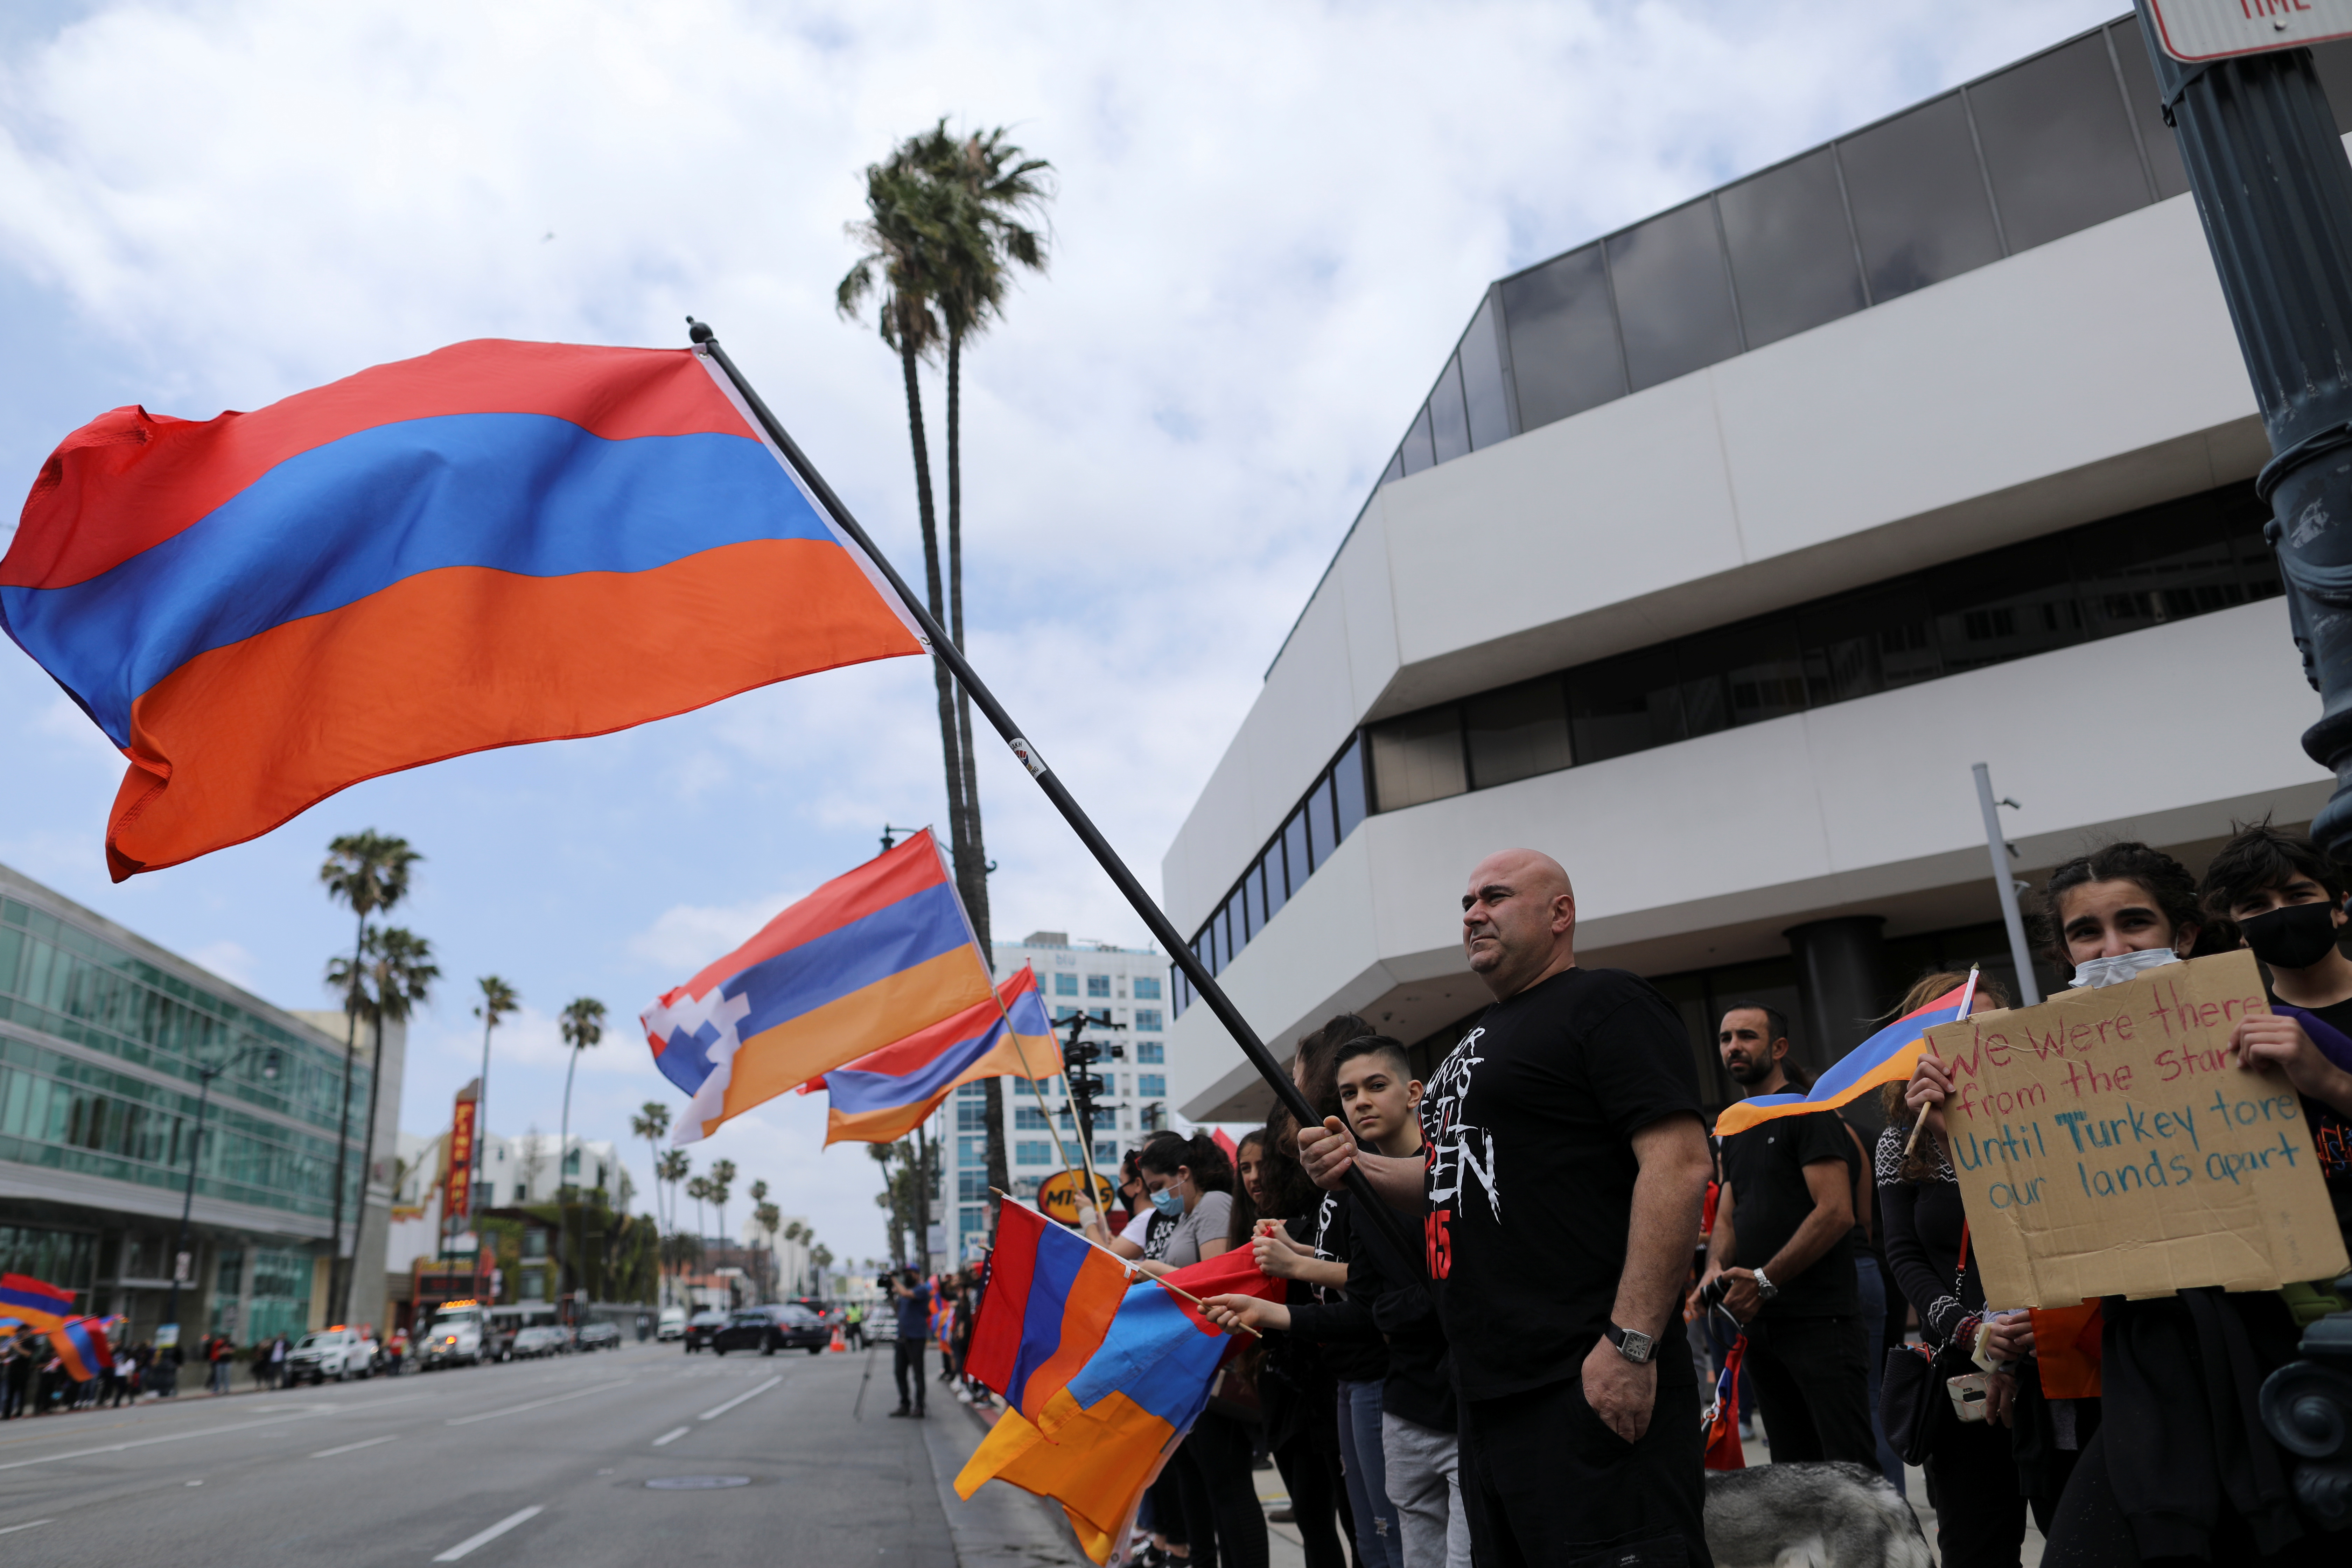 People hold flags as members of the Armenian diaspora in the U.S. rally to mark the anniversary of the 1915 genocide, in Los Angeles, California, U.S. April 24, 2021. REUTERS/David Swanson